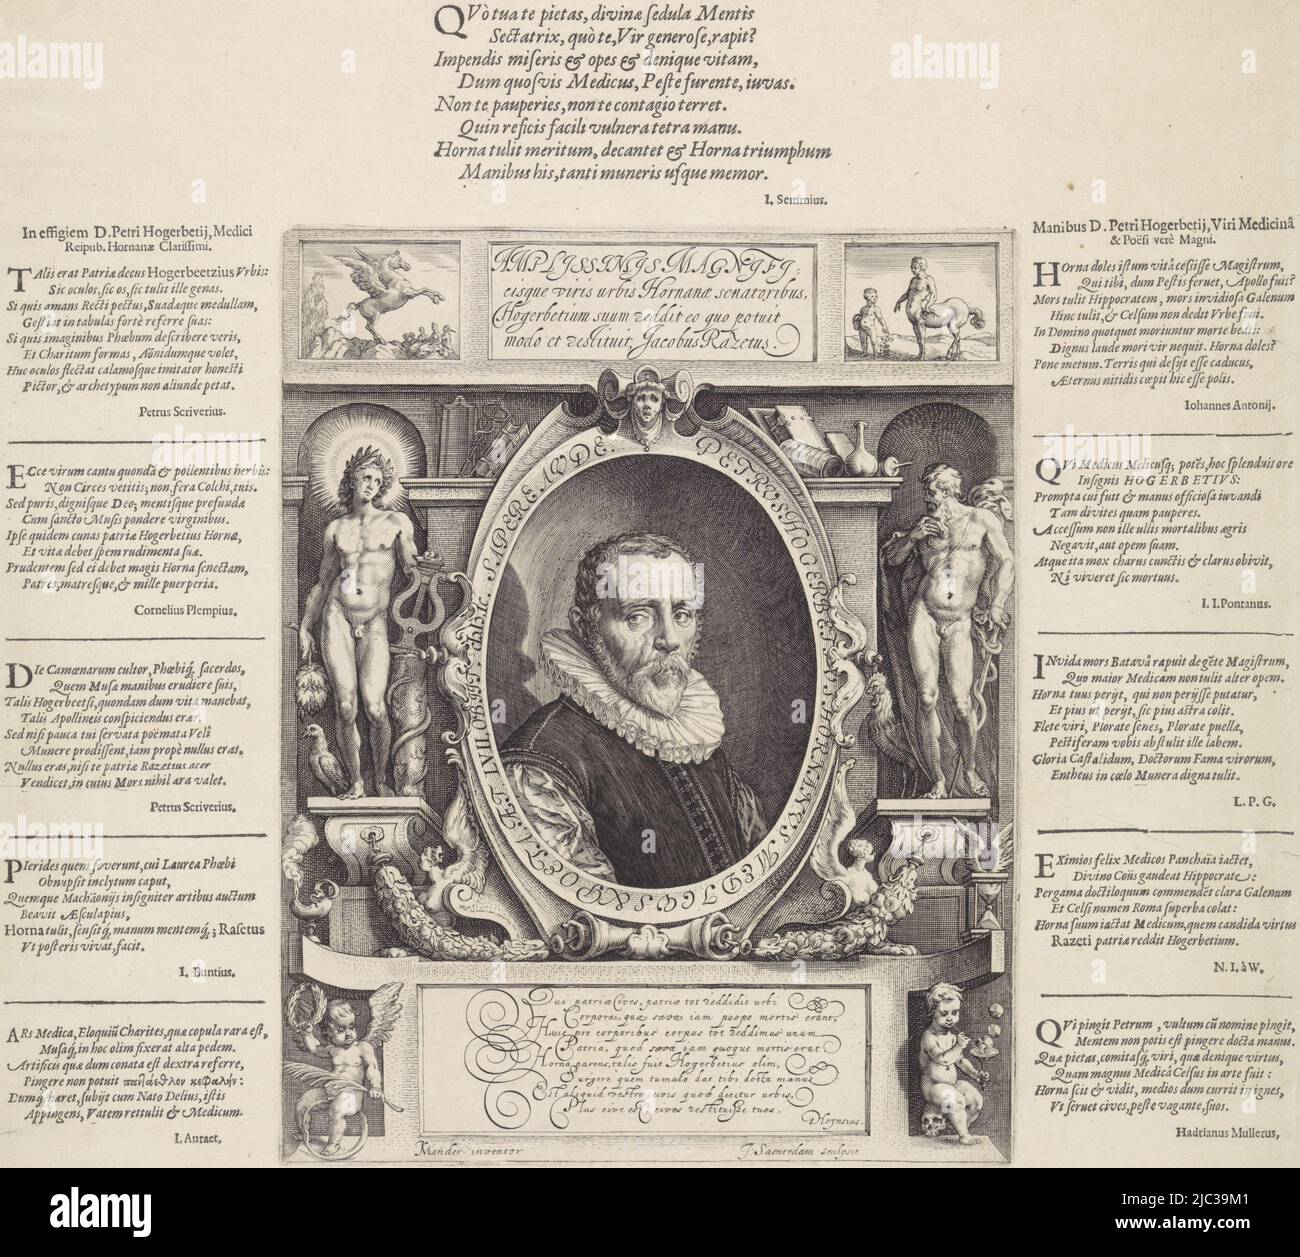 Bust to the right of the physician and poet Petrus Hogerbeets in an oval frame with a Latin border text, which contains information about the person portrayed. On the left, Apollo stands as Apollo Medicus on a console near a column with a snake. He holds a harp. At his right foot a crow, which should have been watching over Coronis. On the right, Aesculapius stands near a rooster on a console. He holds an esculapus. Above the list medical instruments and books. Above left, Pegasus springing the Hippocrene. On the right, the young Aesculapius with the centaur Chiron, who raised him. Between Stock Photo